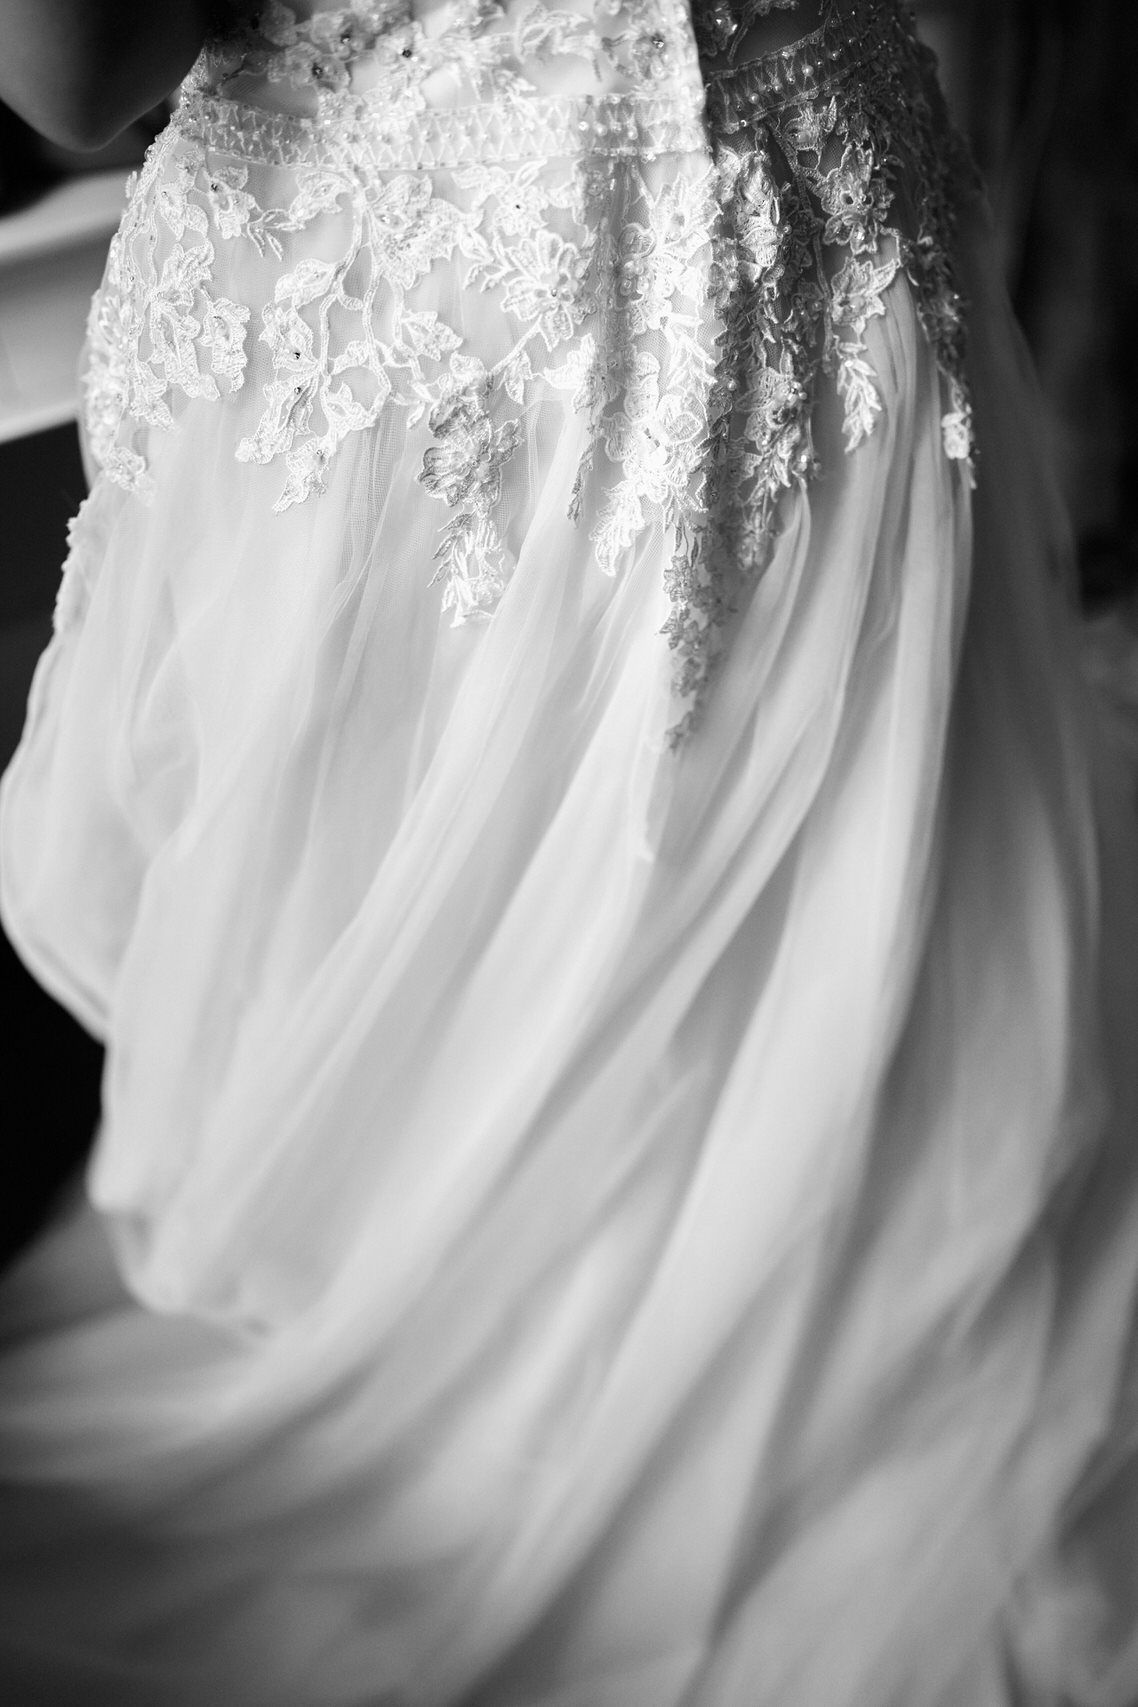 A black and white picture of a bride's wedding gown.